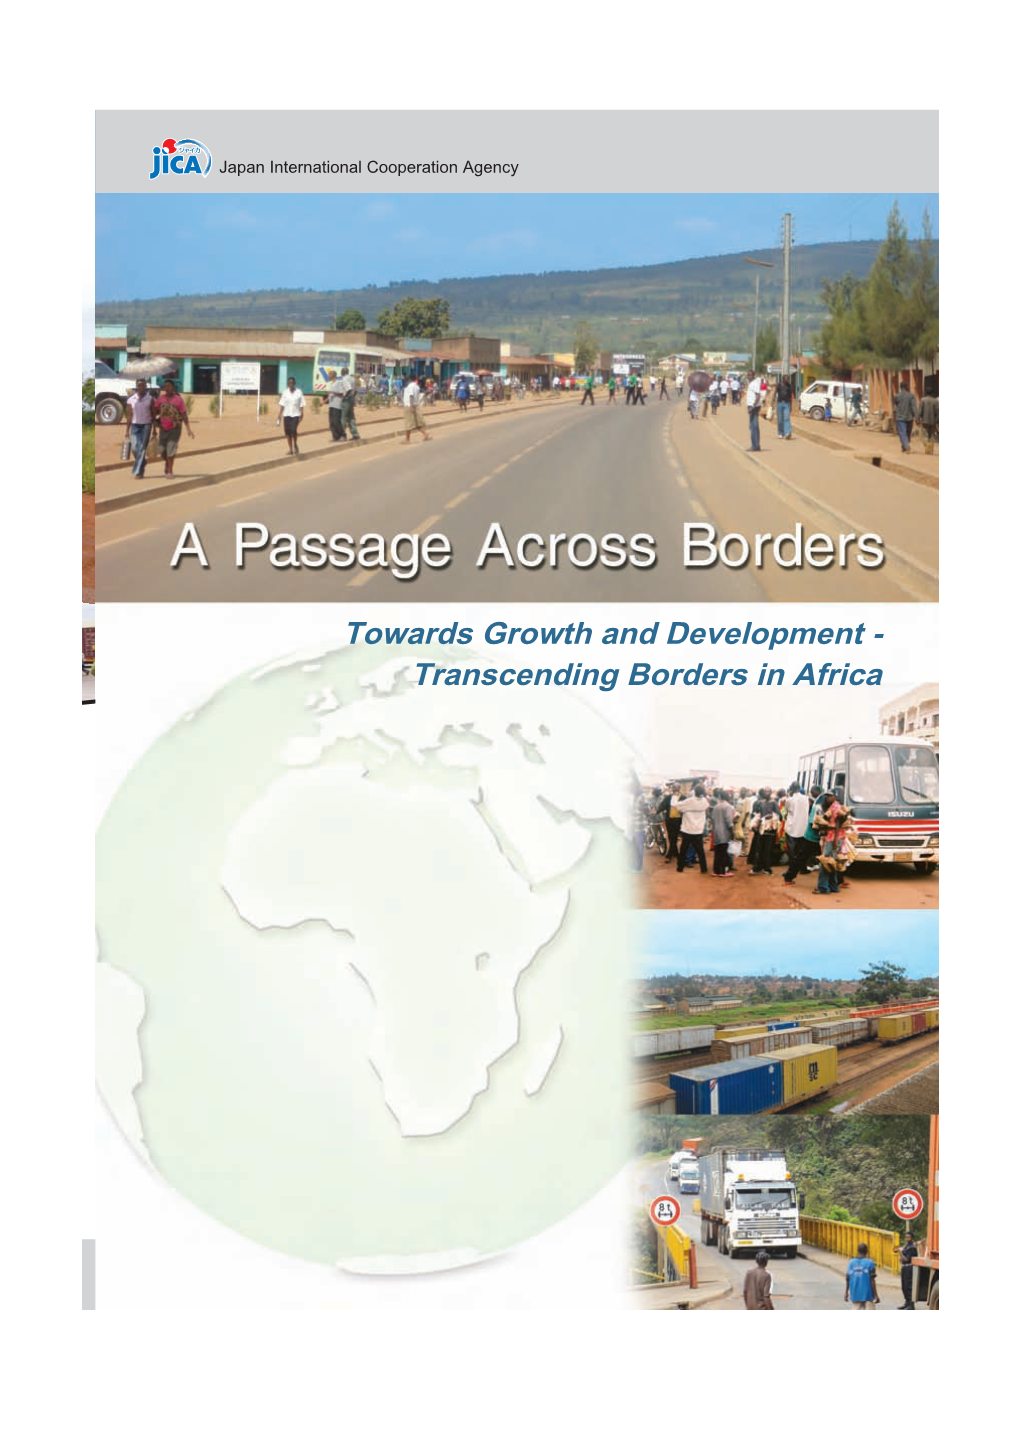 Towards Growth and Development - Transcending Borders in Africa Introduction - Towards Growth and Development in Africa